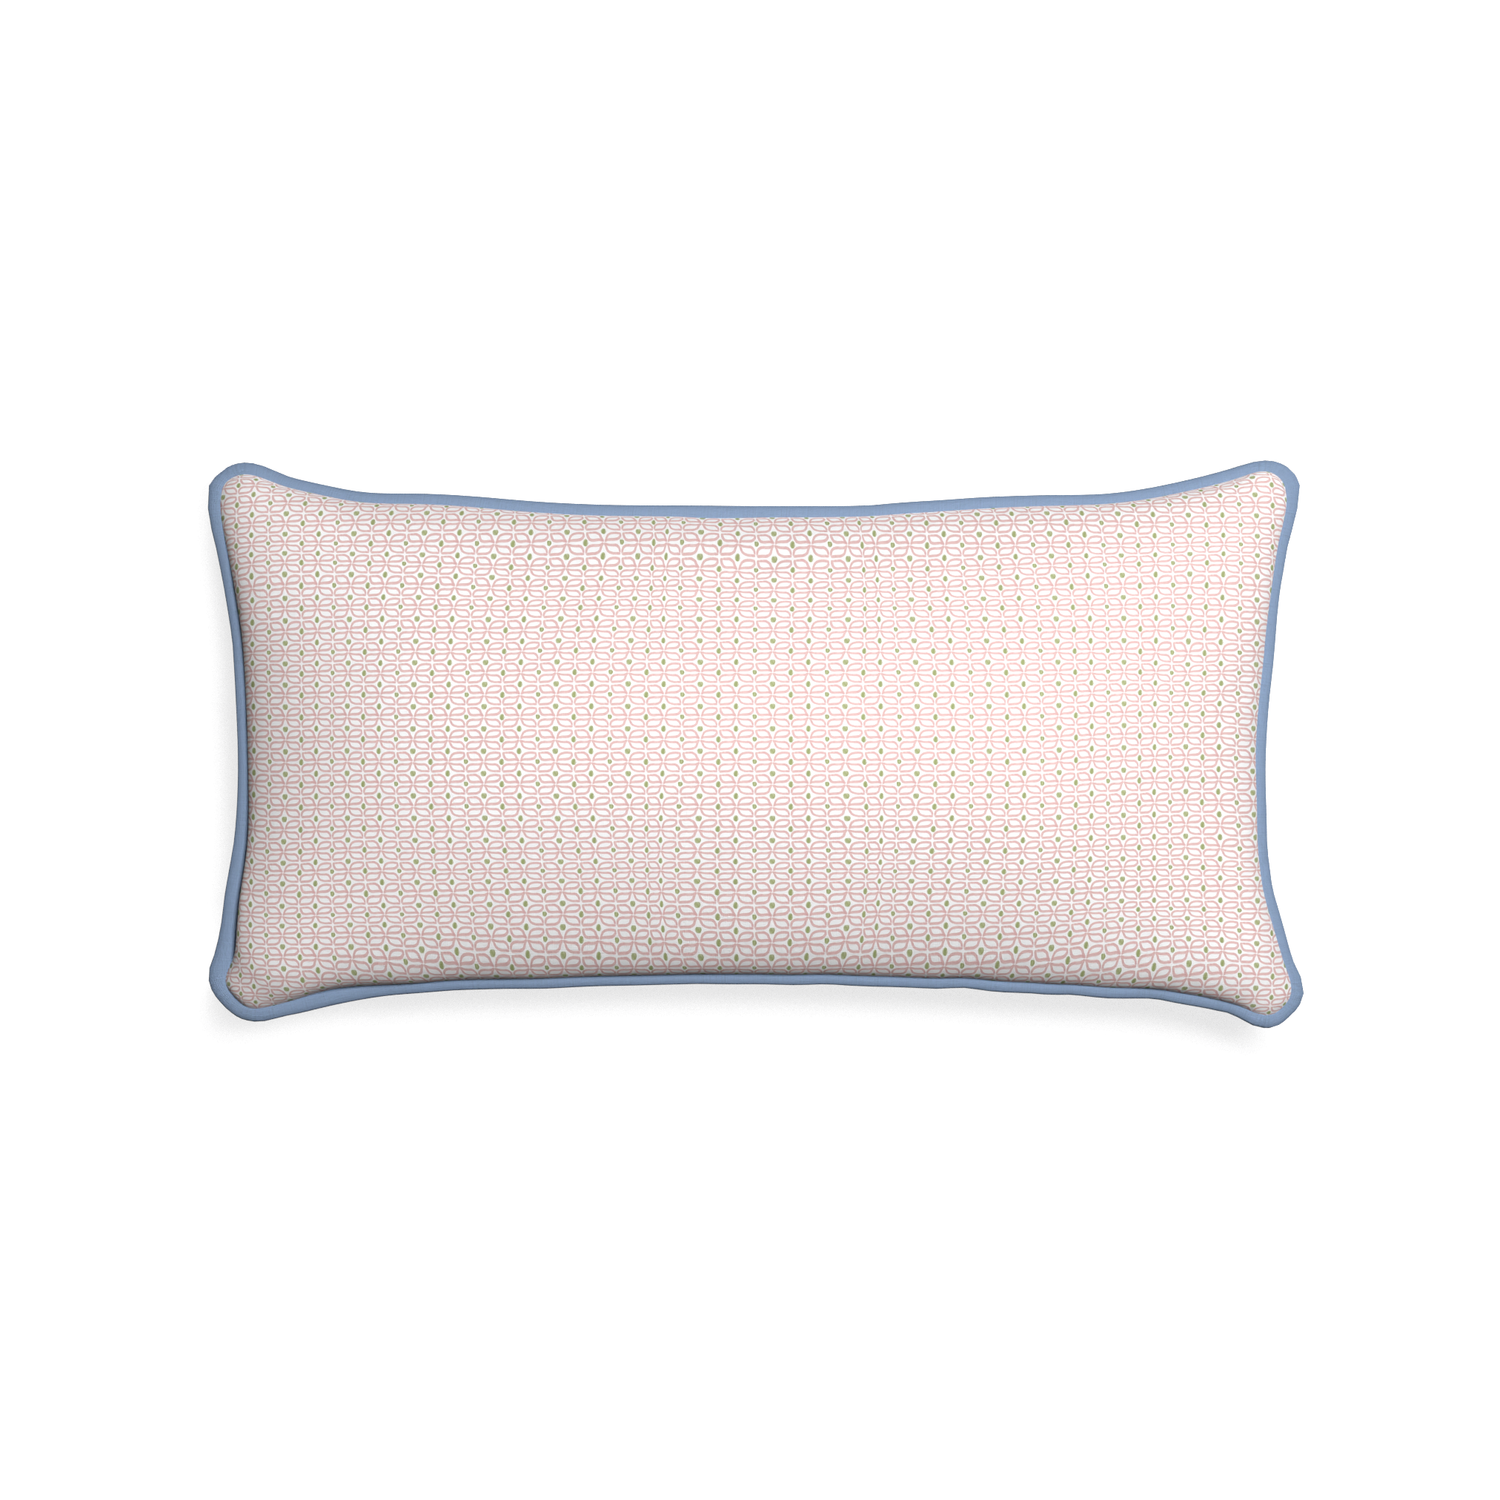 Midi-lumbar loomi pink custom pink geometricpillow with sky piping on white background